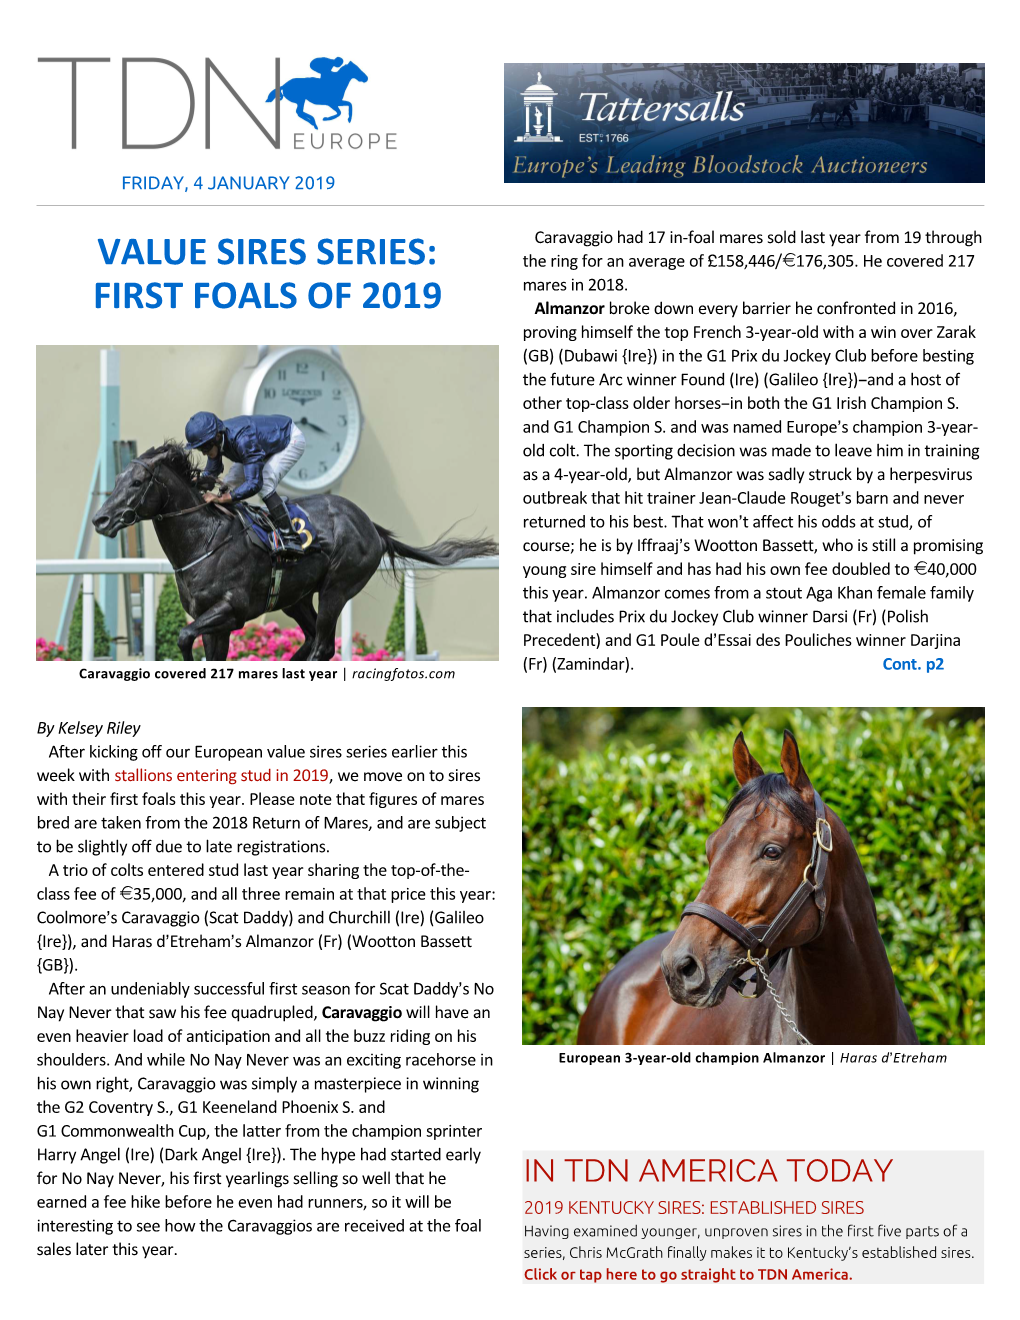 Value Sires Series: First Foals of 2019 Cont